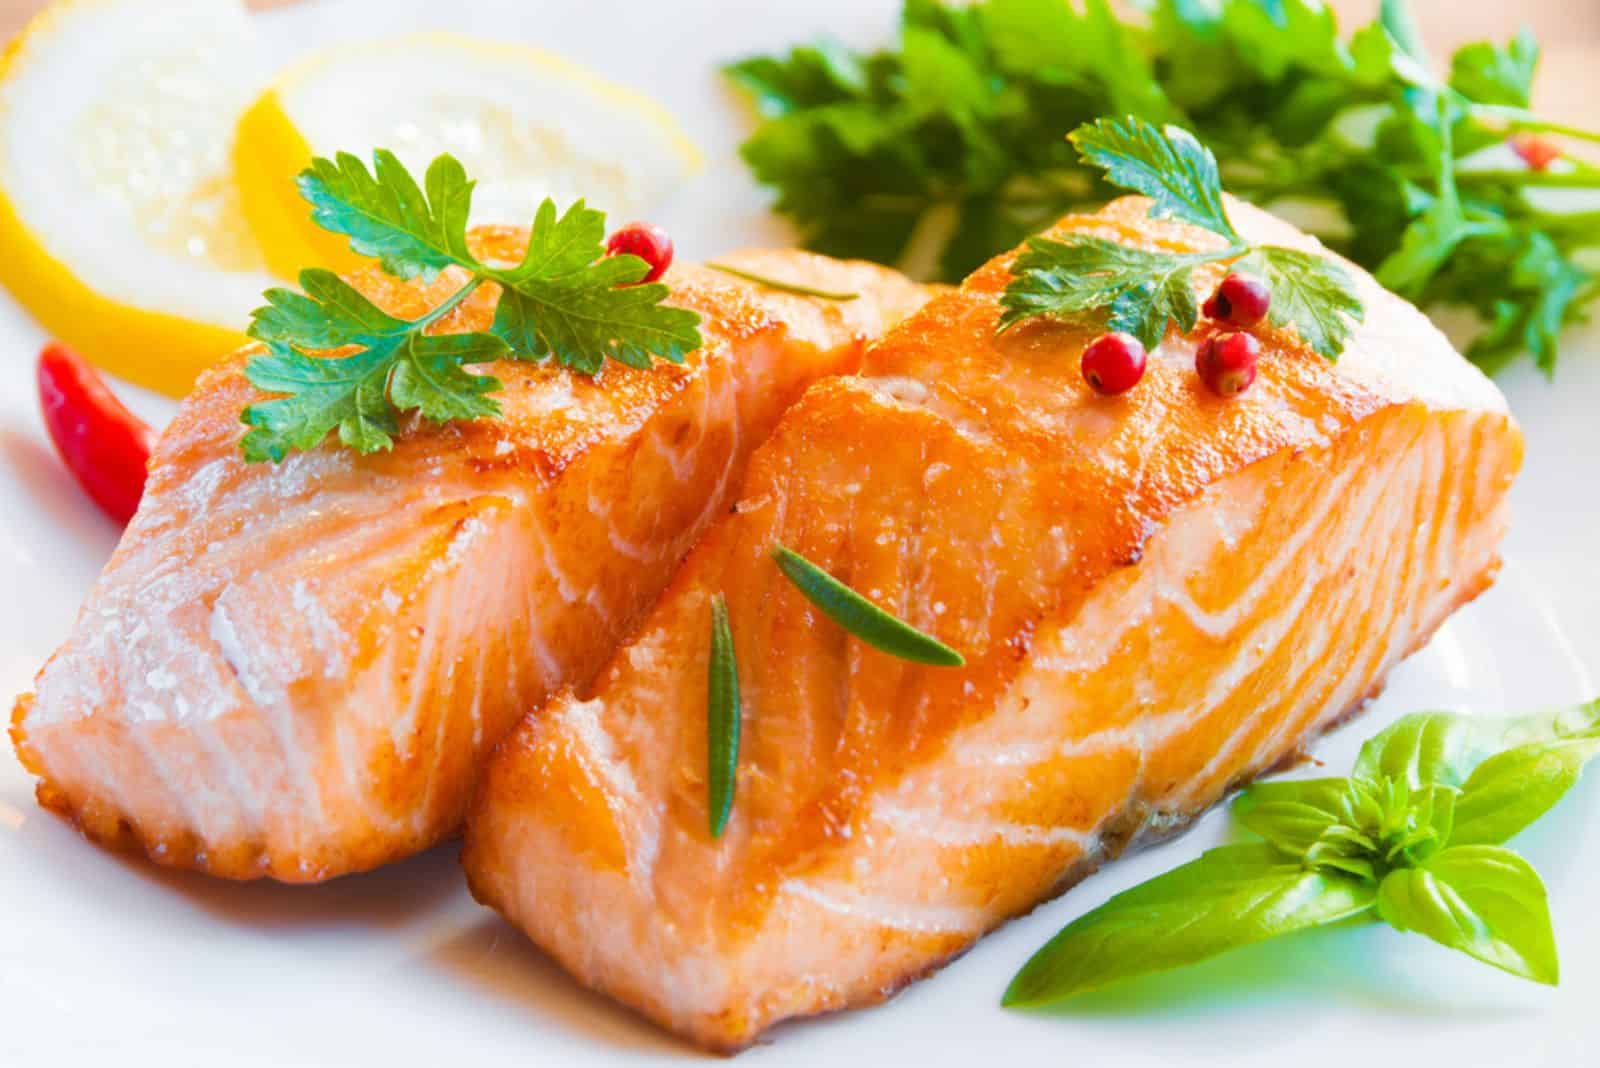 Delicious cooked salmon fish fillets
